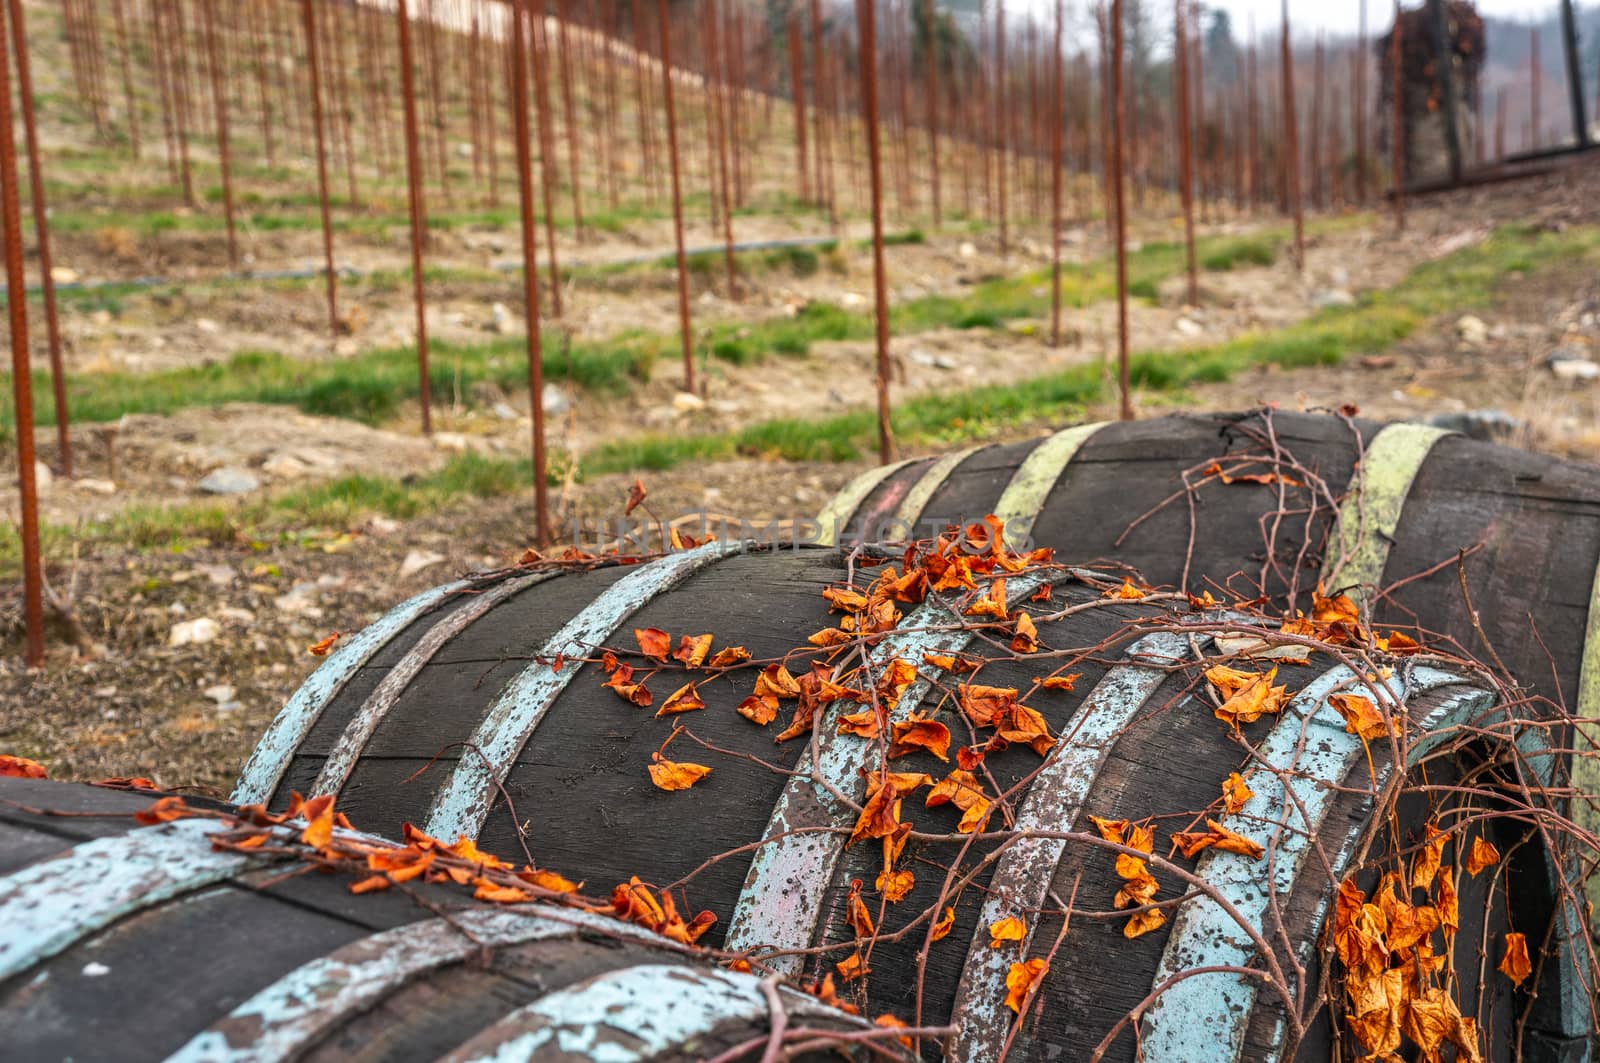 Dark vintage wine barrels with orange vibrant dry leaf vines climbing on them. St Claires vineyard, Prague in the background during fall season. Blue and green paint feeling of the brass around the barrels.